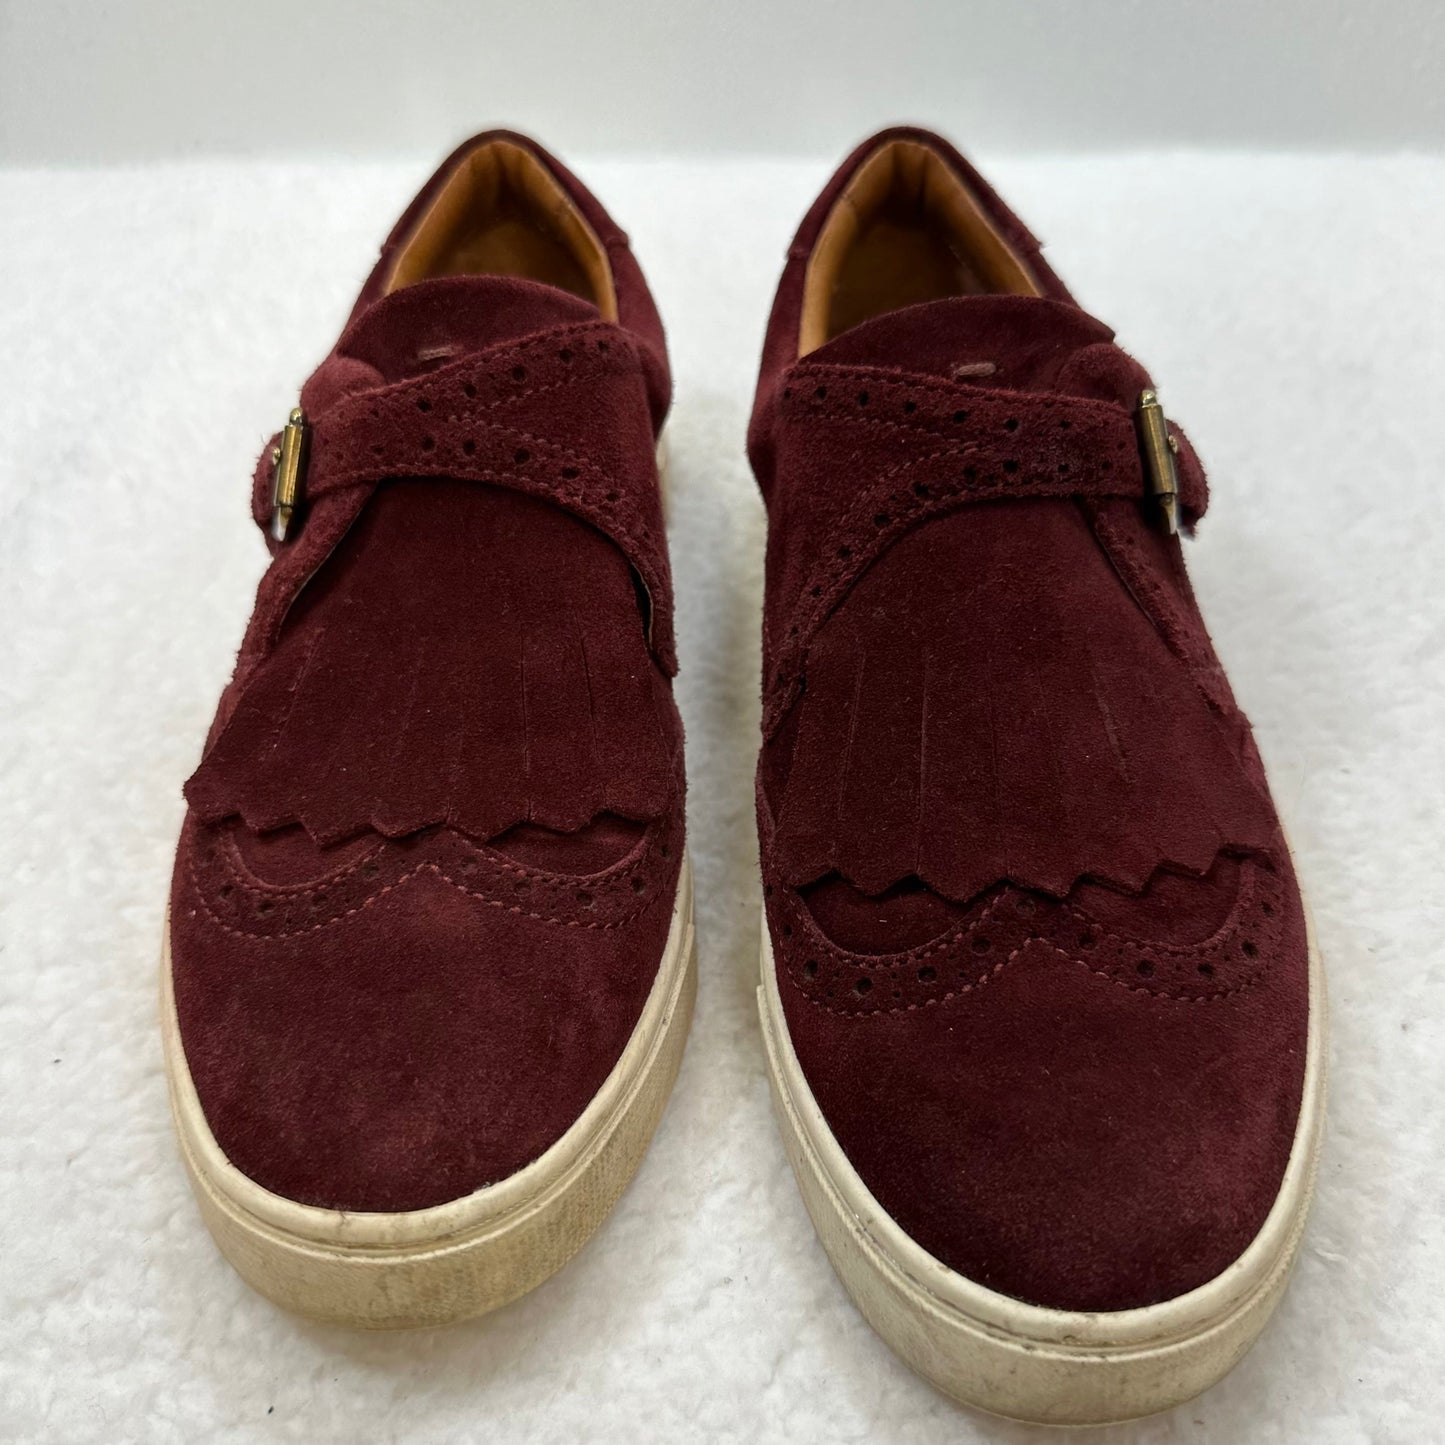 Wine Shoes Flats Loafer Oxford Frye, Size 8.5